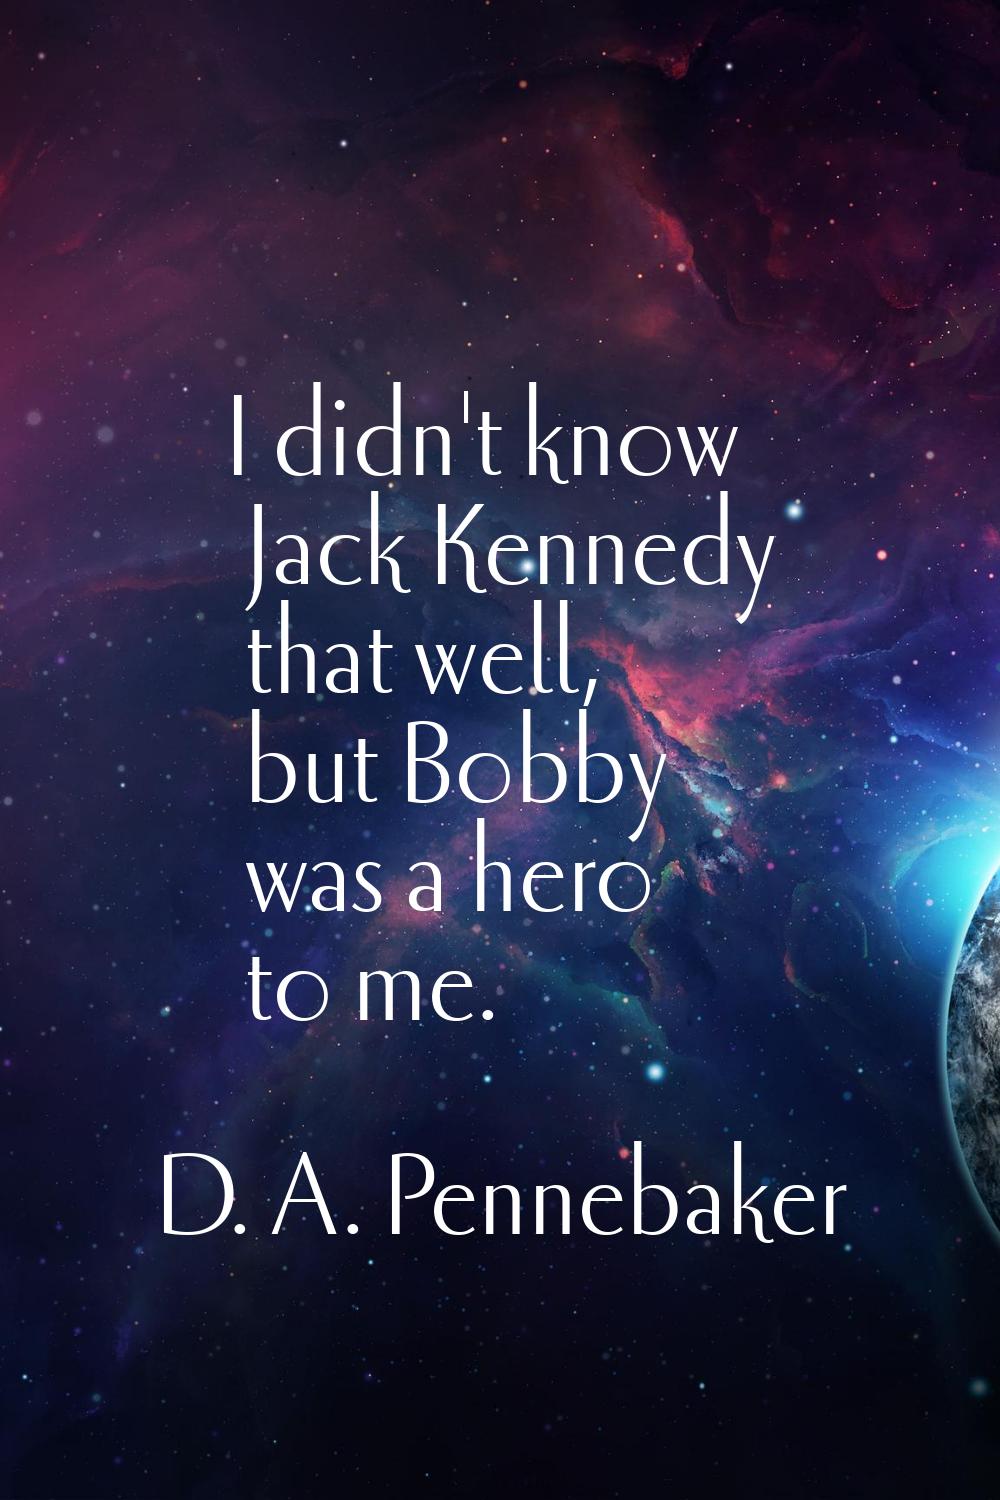 I didn't know Jack Kennedy that well, but Bobby was a hero to me.